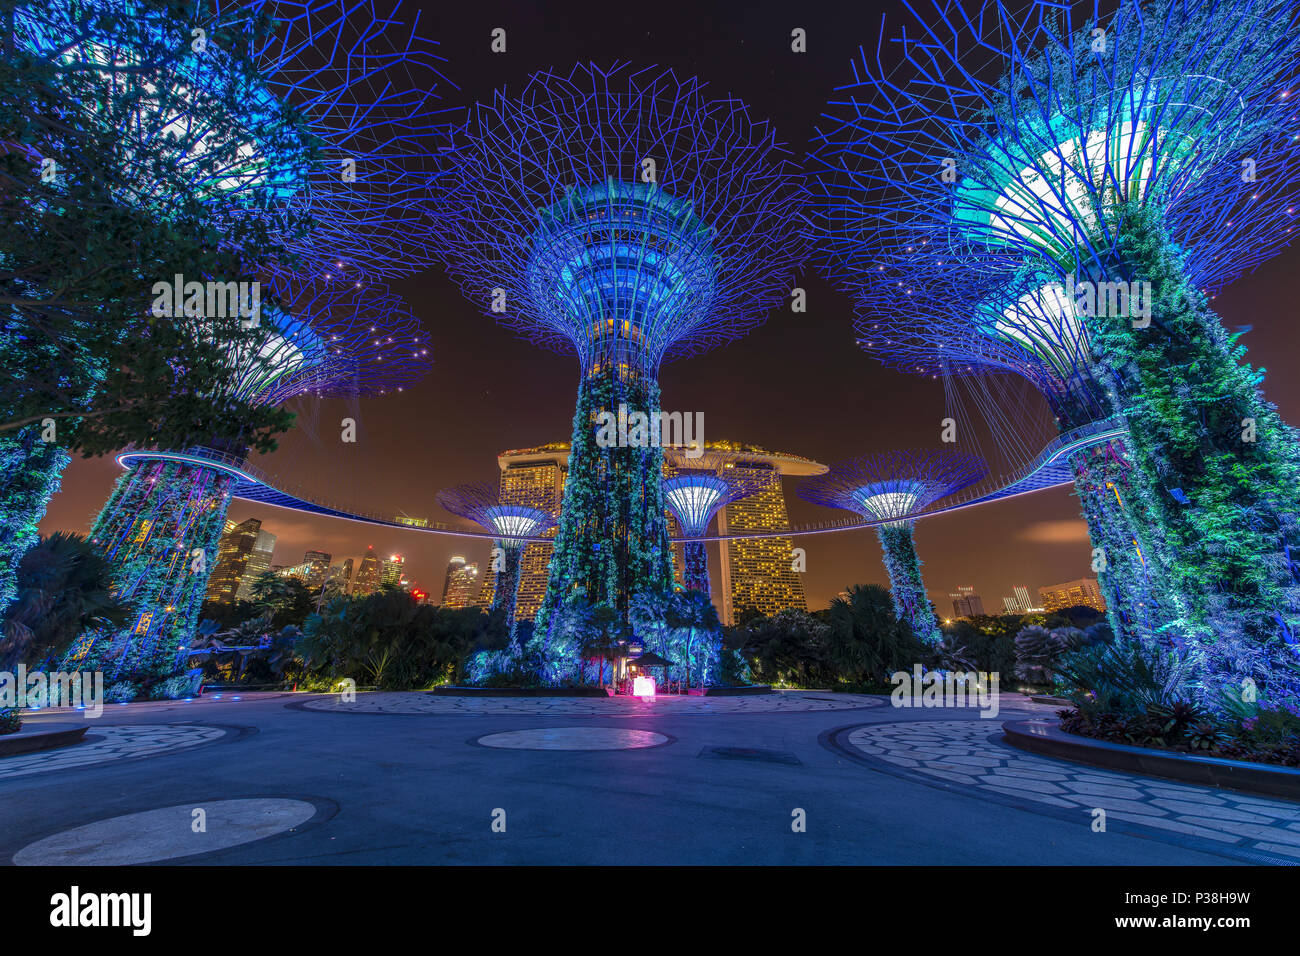 Singapore - April 13: Night view of the Supertree Grove in the Garden by the Bay with Marina Bay Sands background taken on April 13, 2018 in Singapore Stock Photo